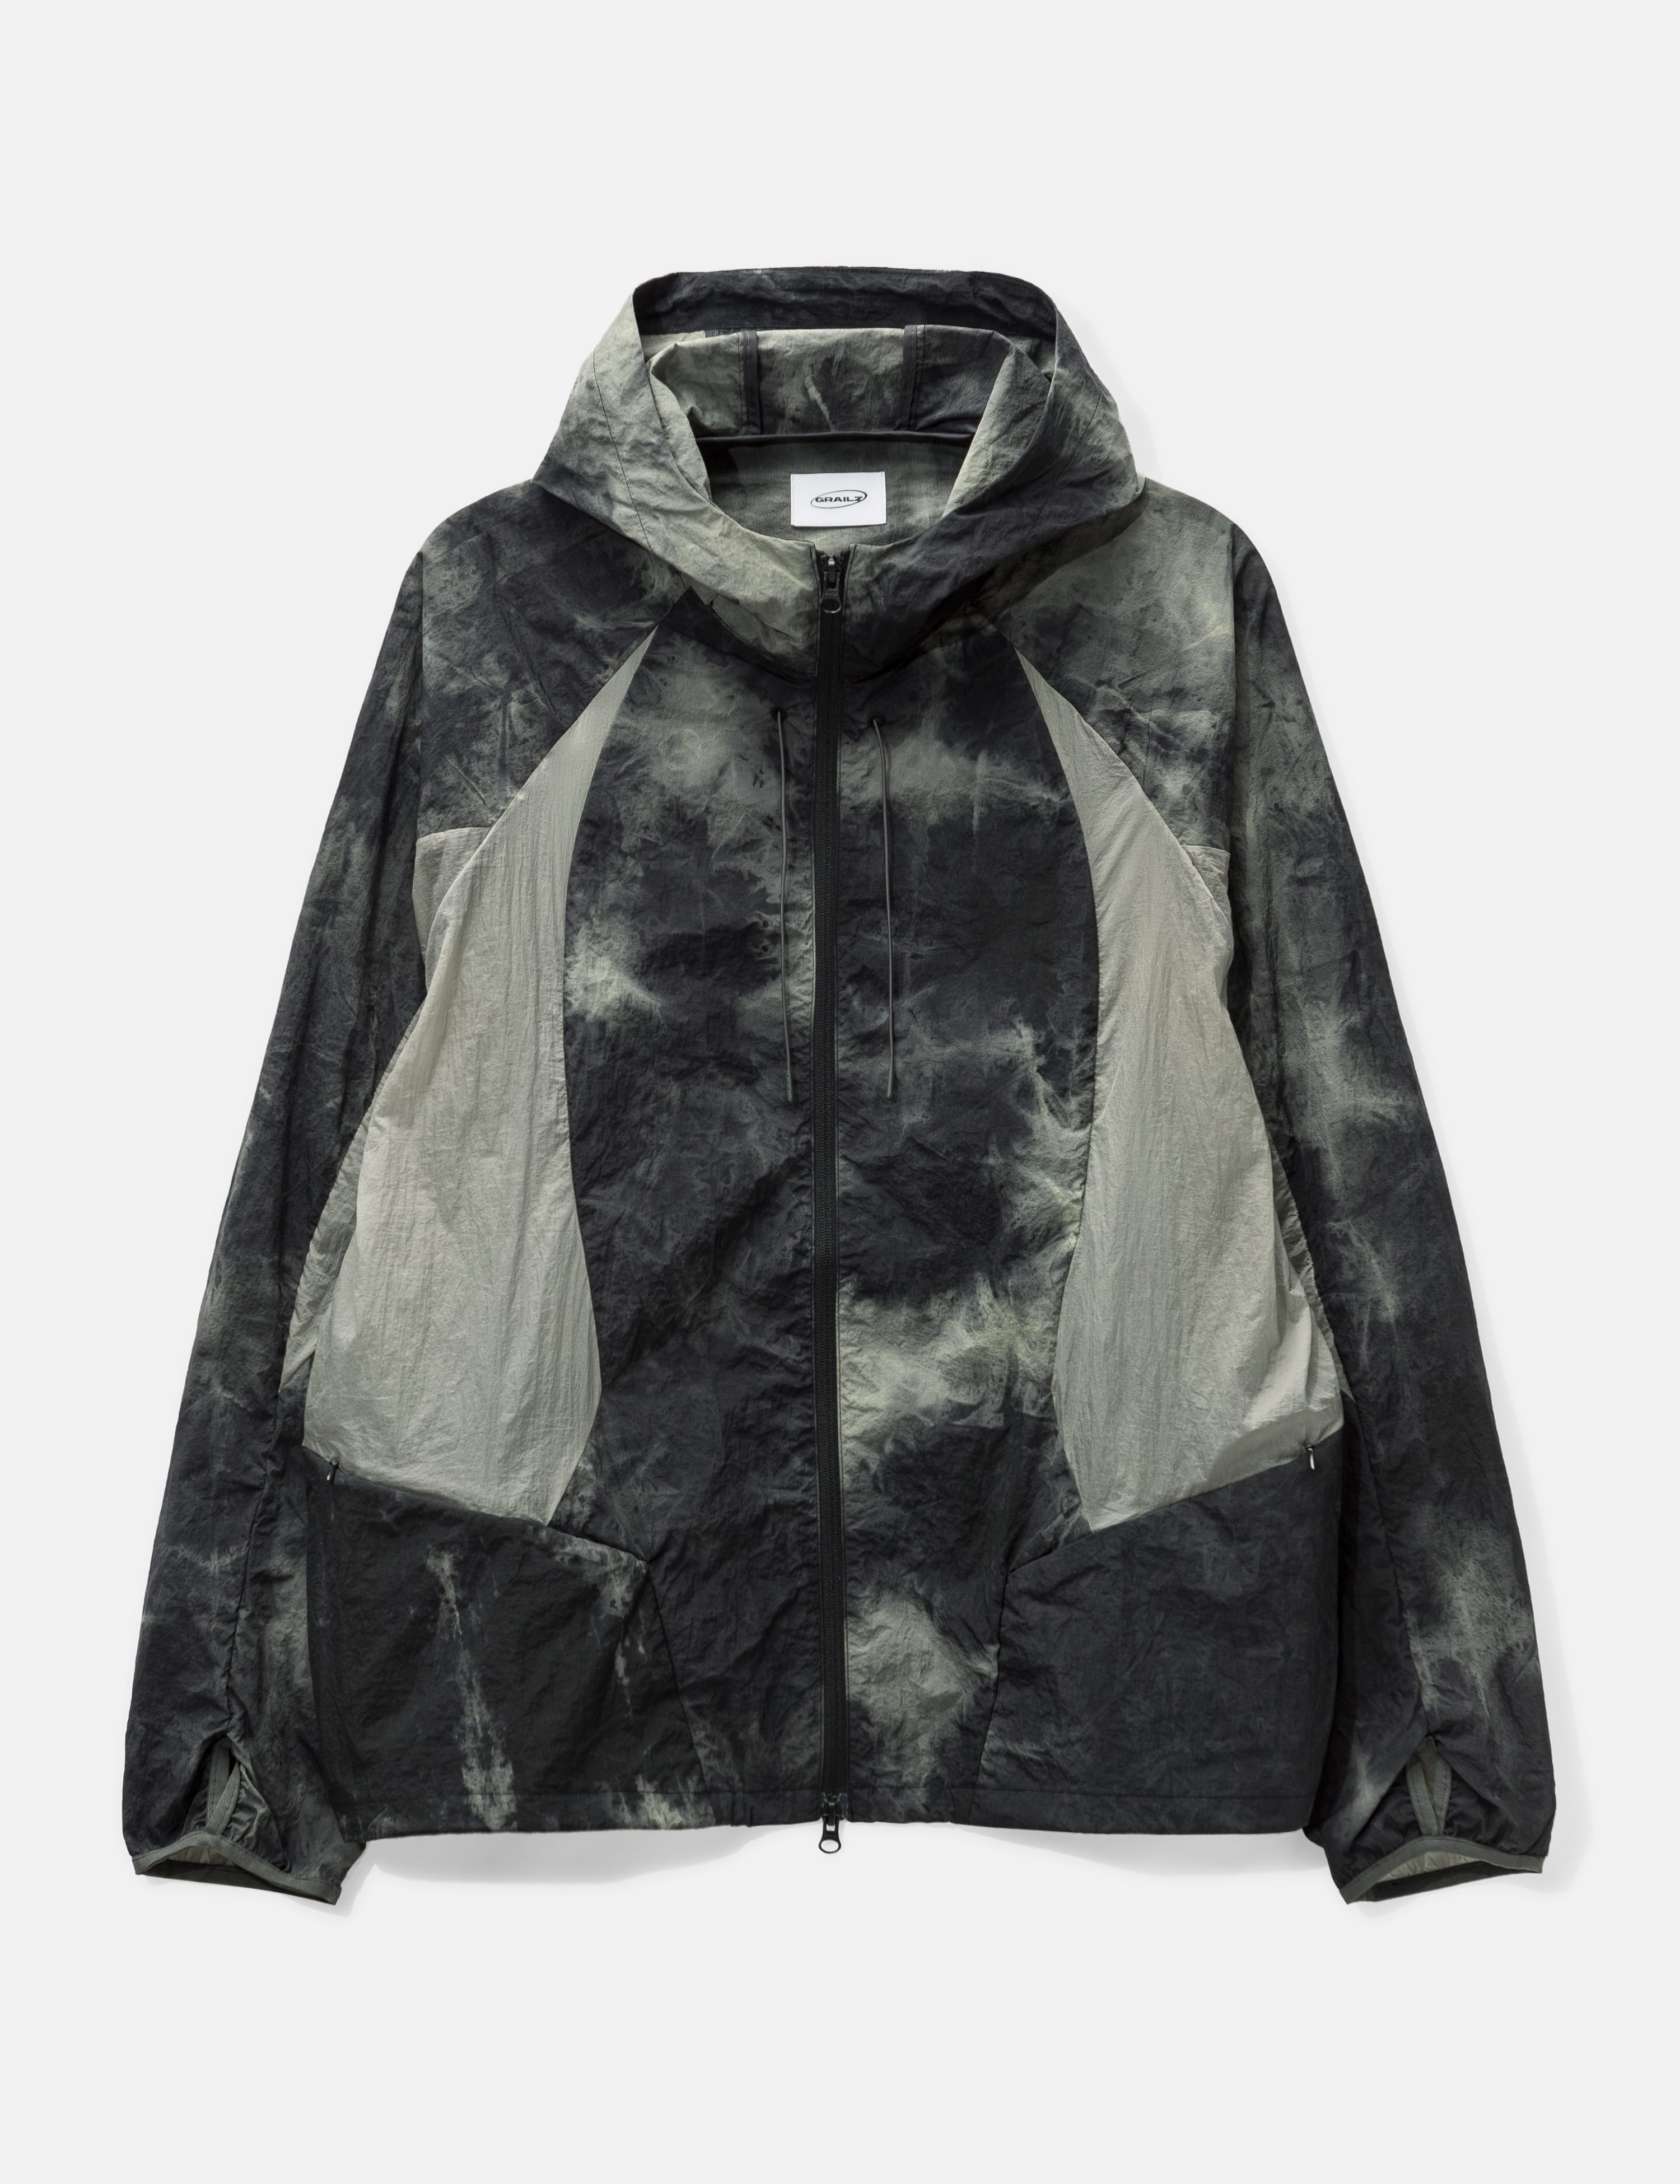 GRAILZ - Packable Light Jacket | HBX - Globally Curated Fashion